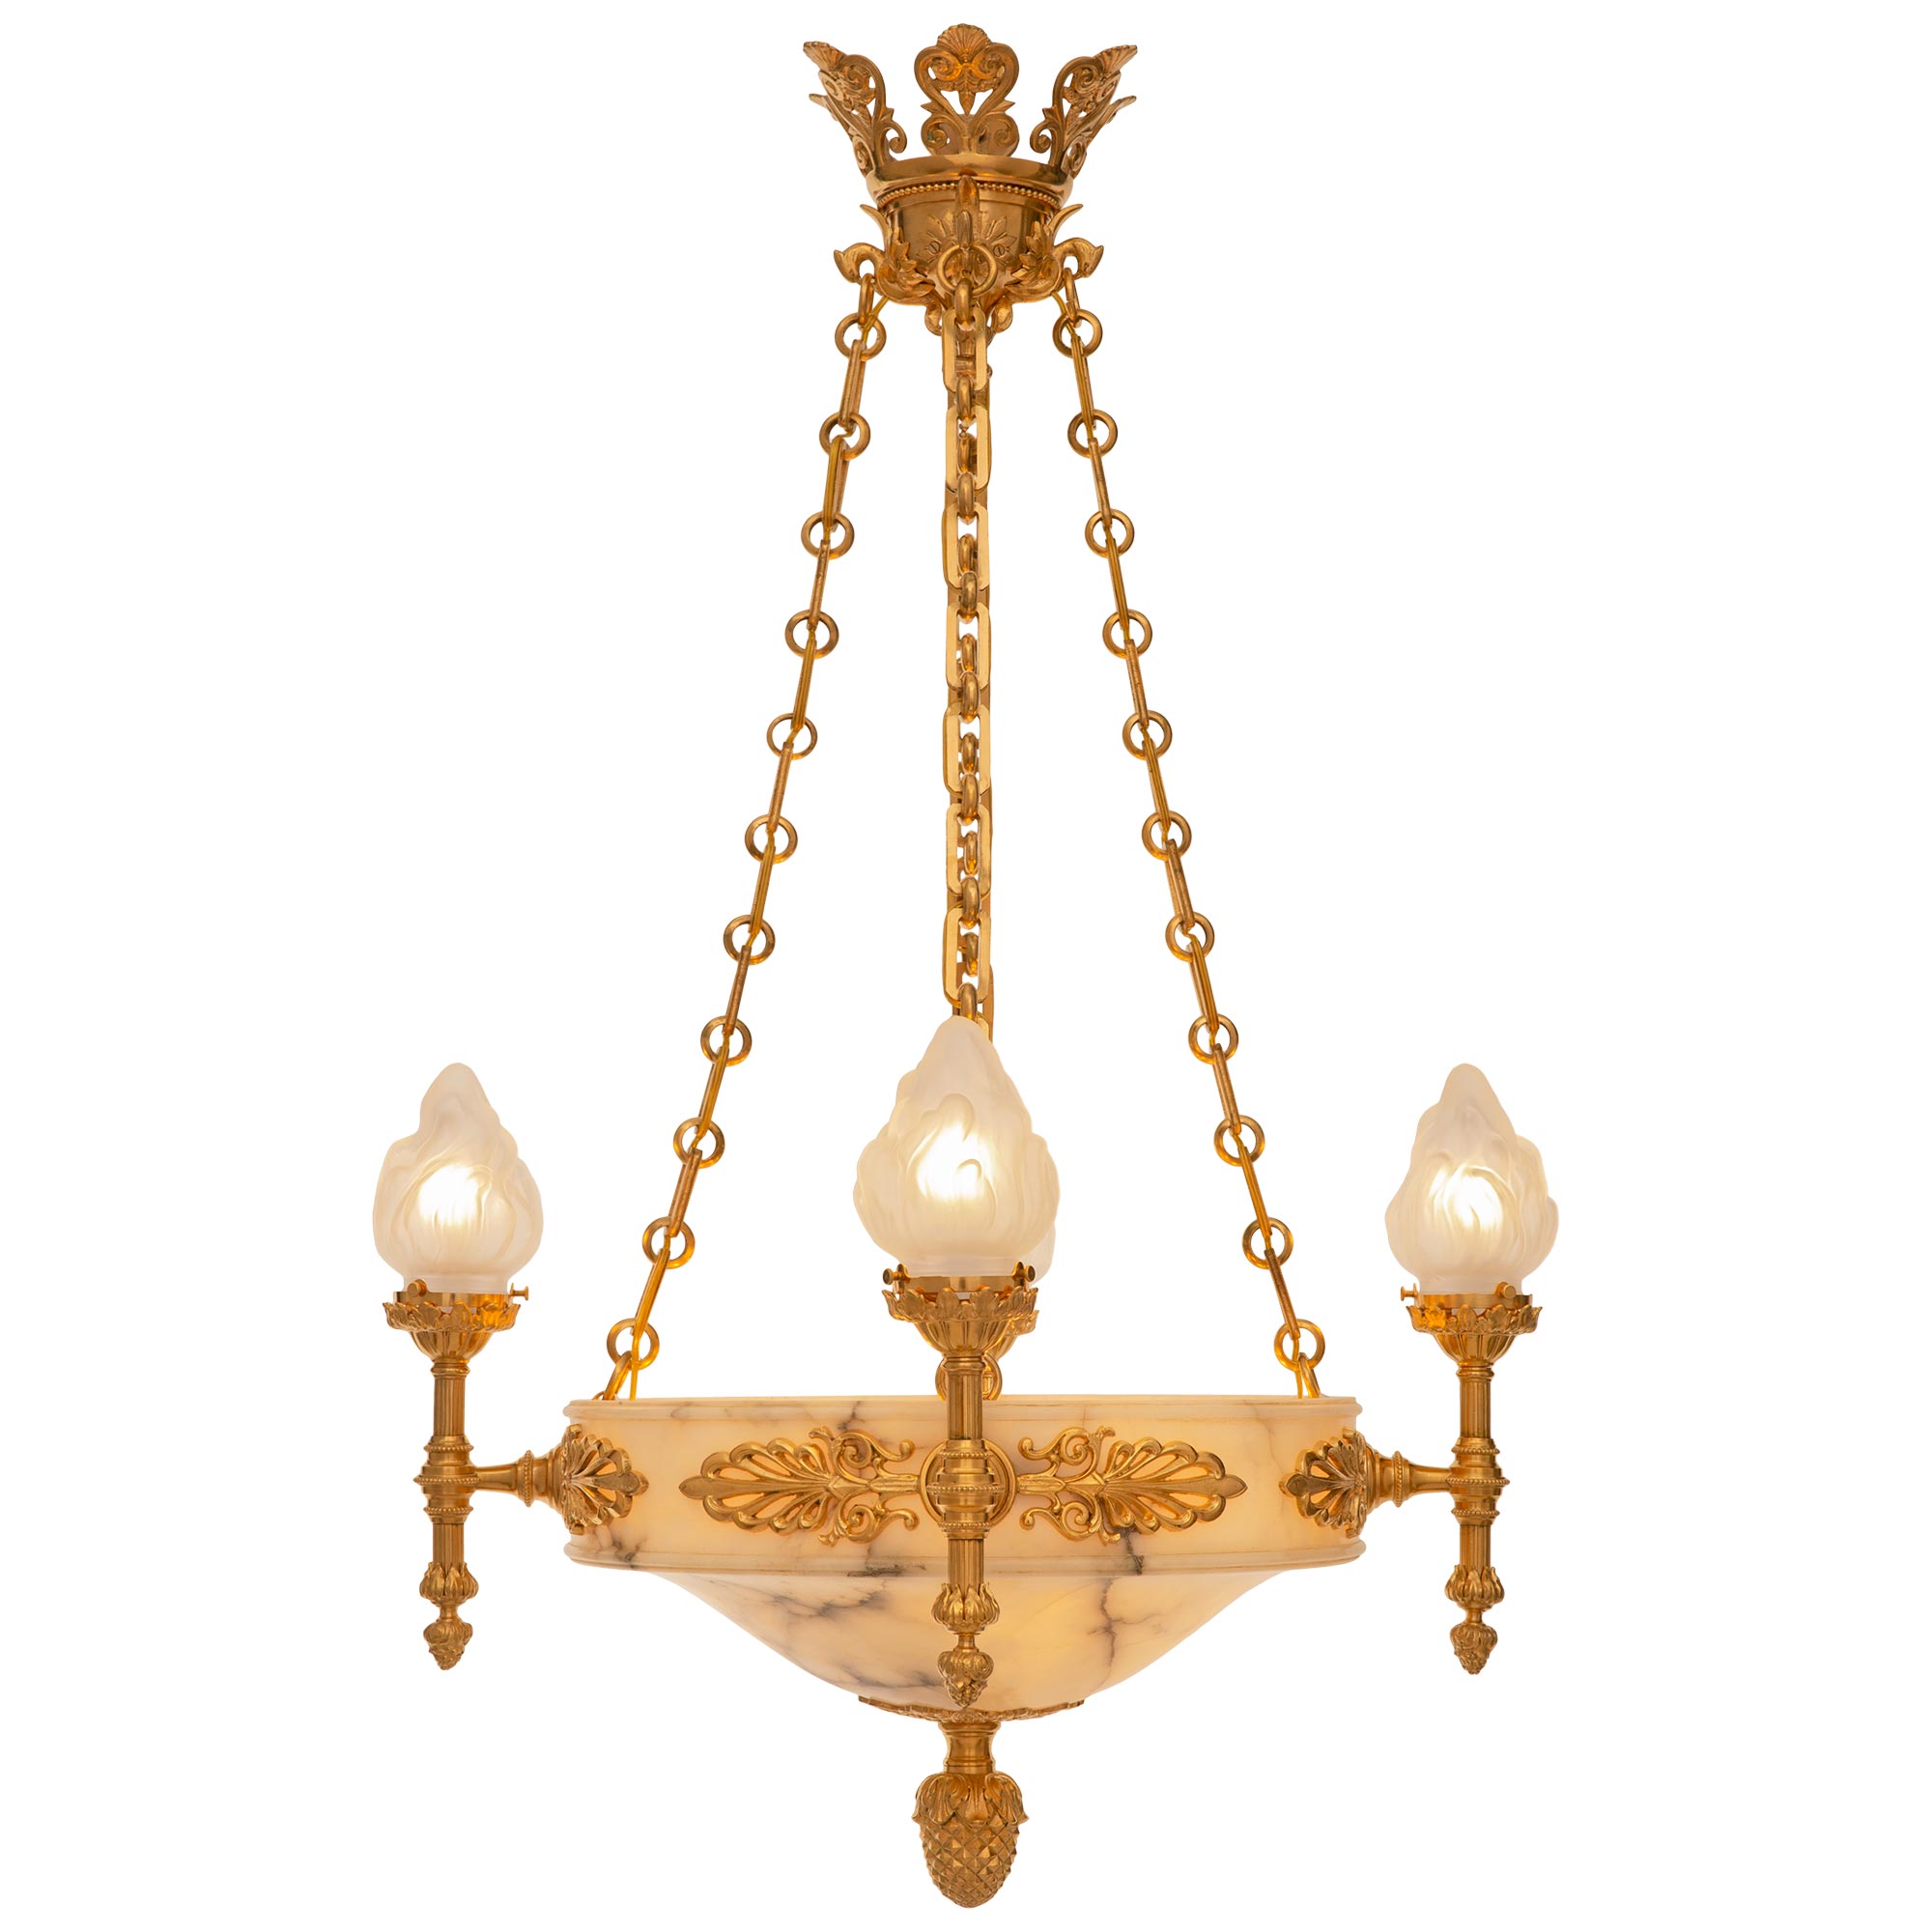 French 19th Century Empire St. Alabaster And Ormolu Chandelier For Sale